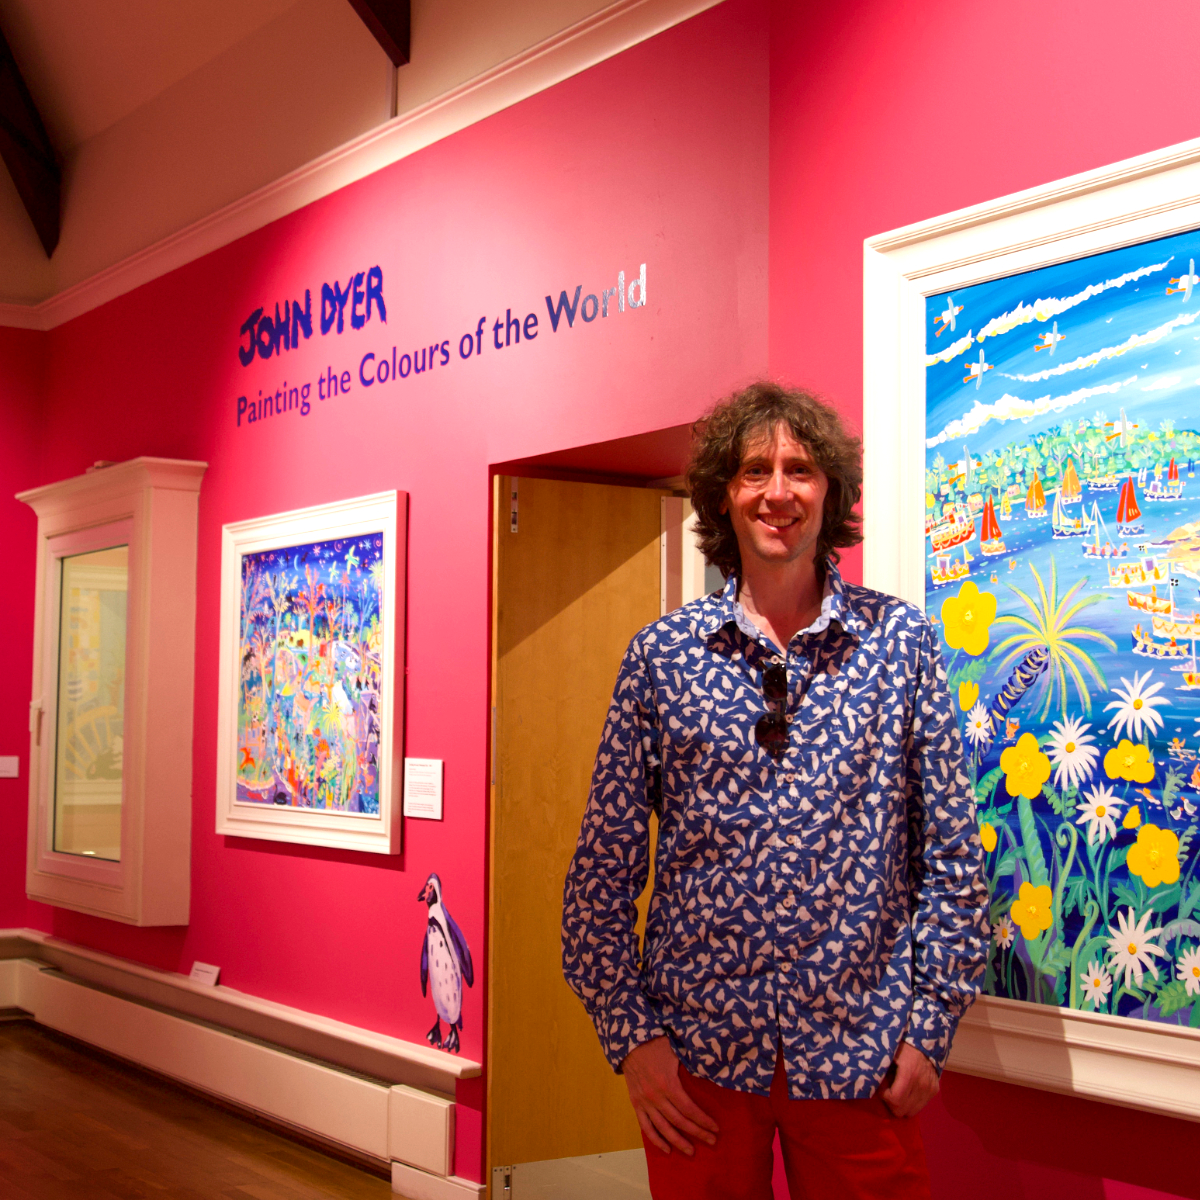 Cornwall's best loved artist, John Dyer, pictured at his 50th birthday retrospective exhibition in Falmouth Art Gallery in Cornwall